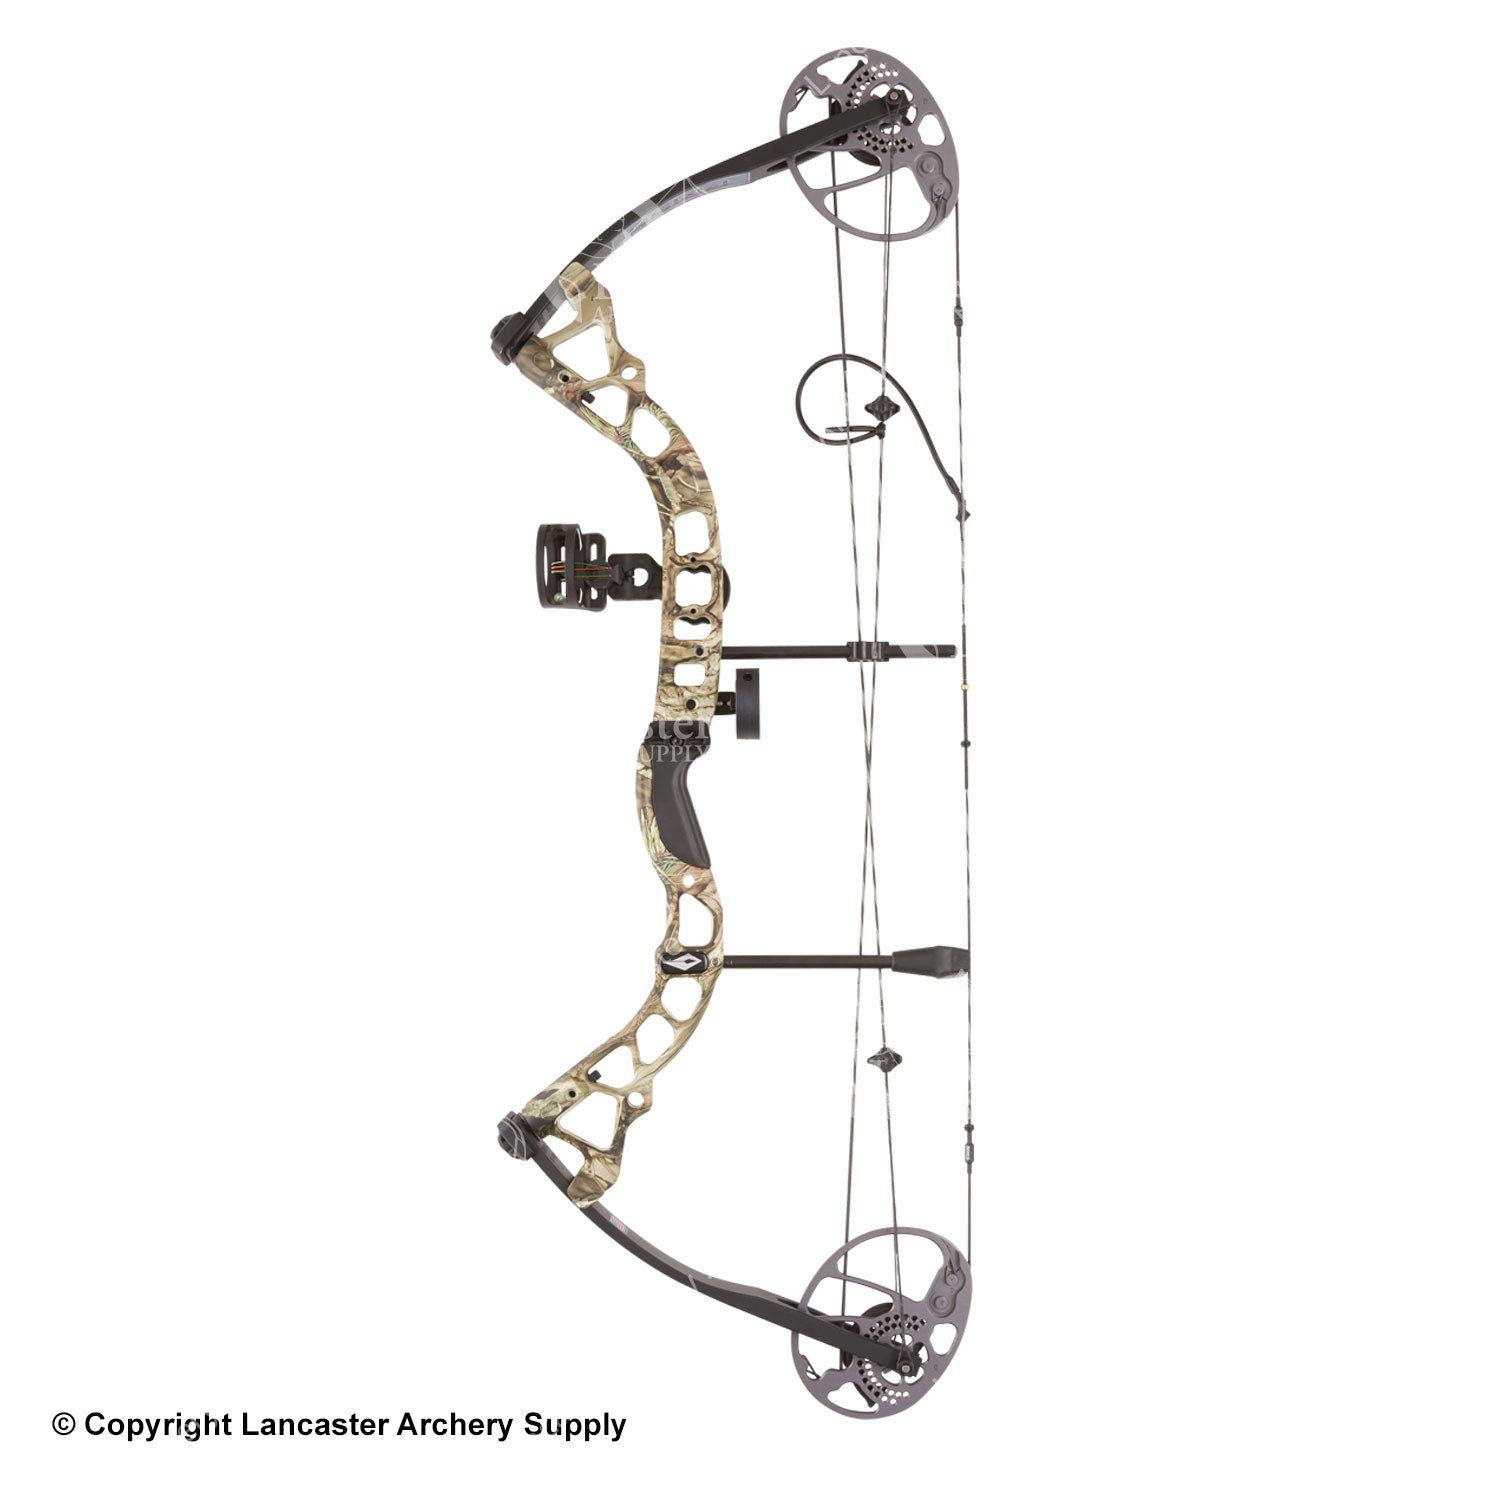 Diamond Prism Compound Bow Package